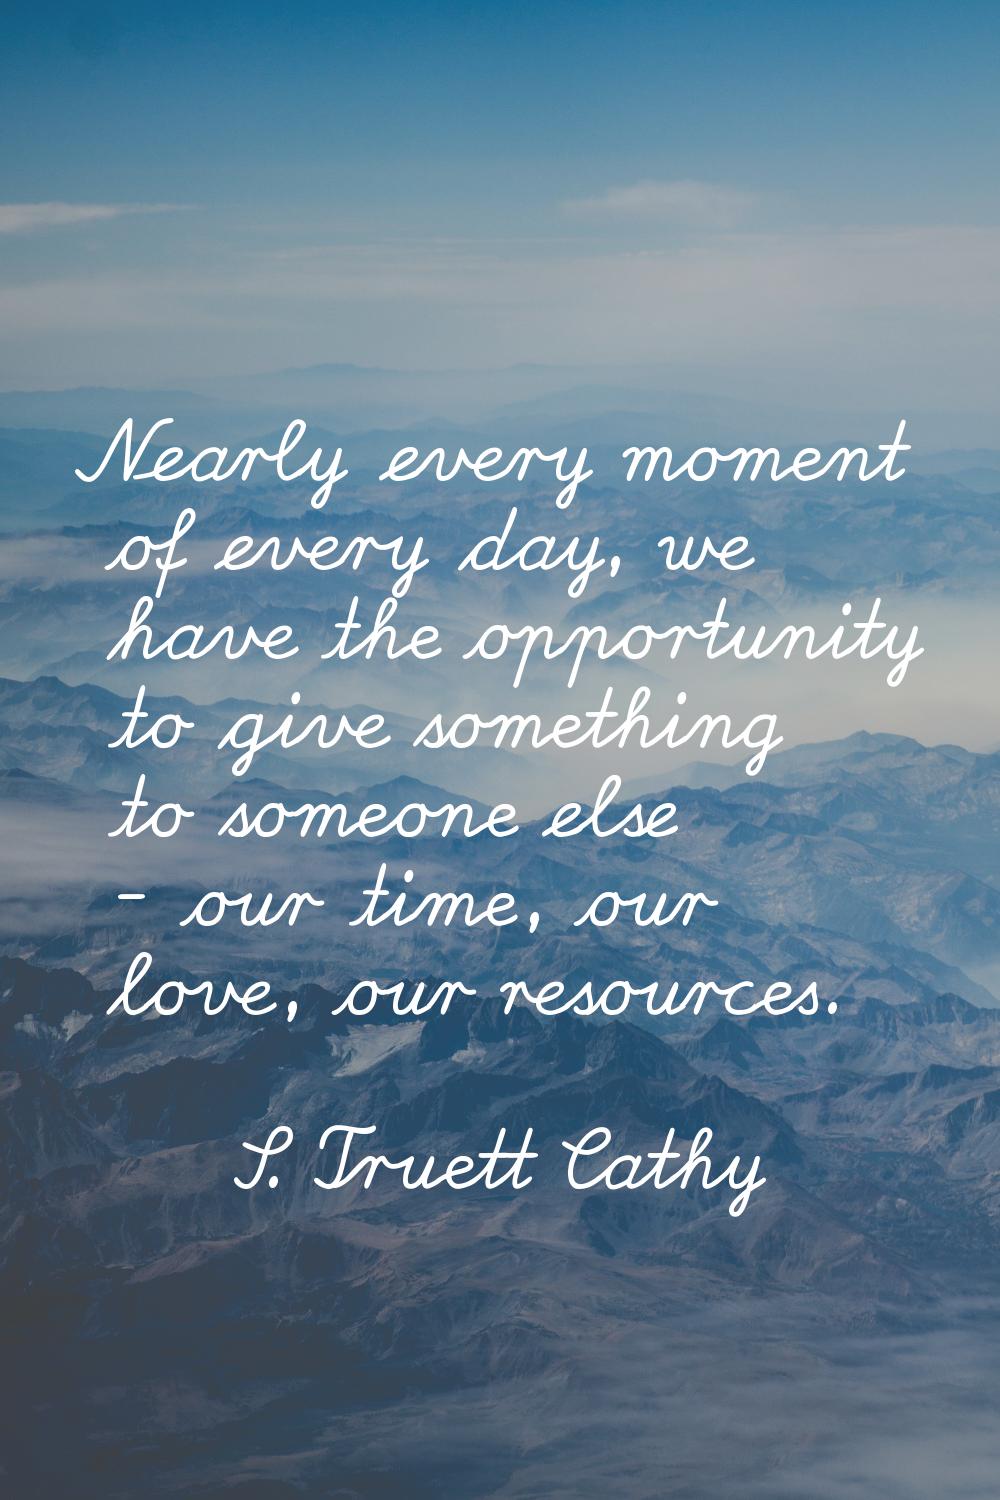 Nearly every moment of every day, we have the opportunity to give something to someone else - our t